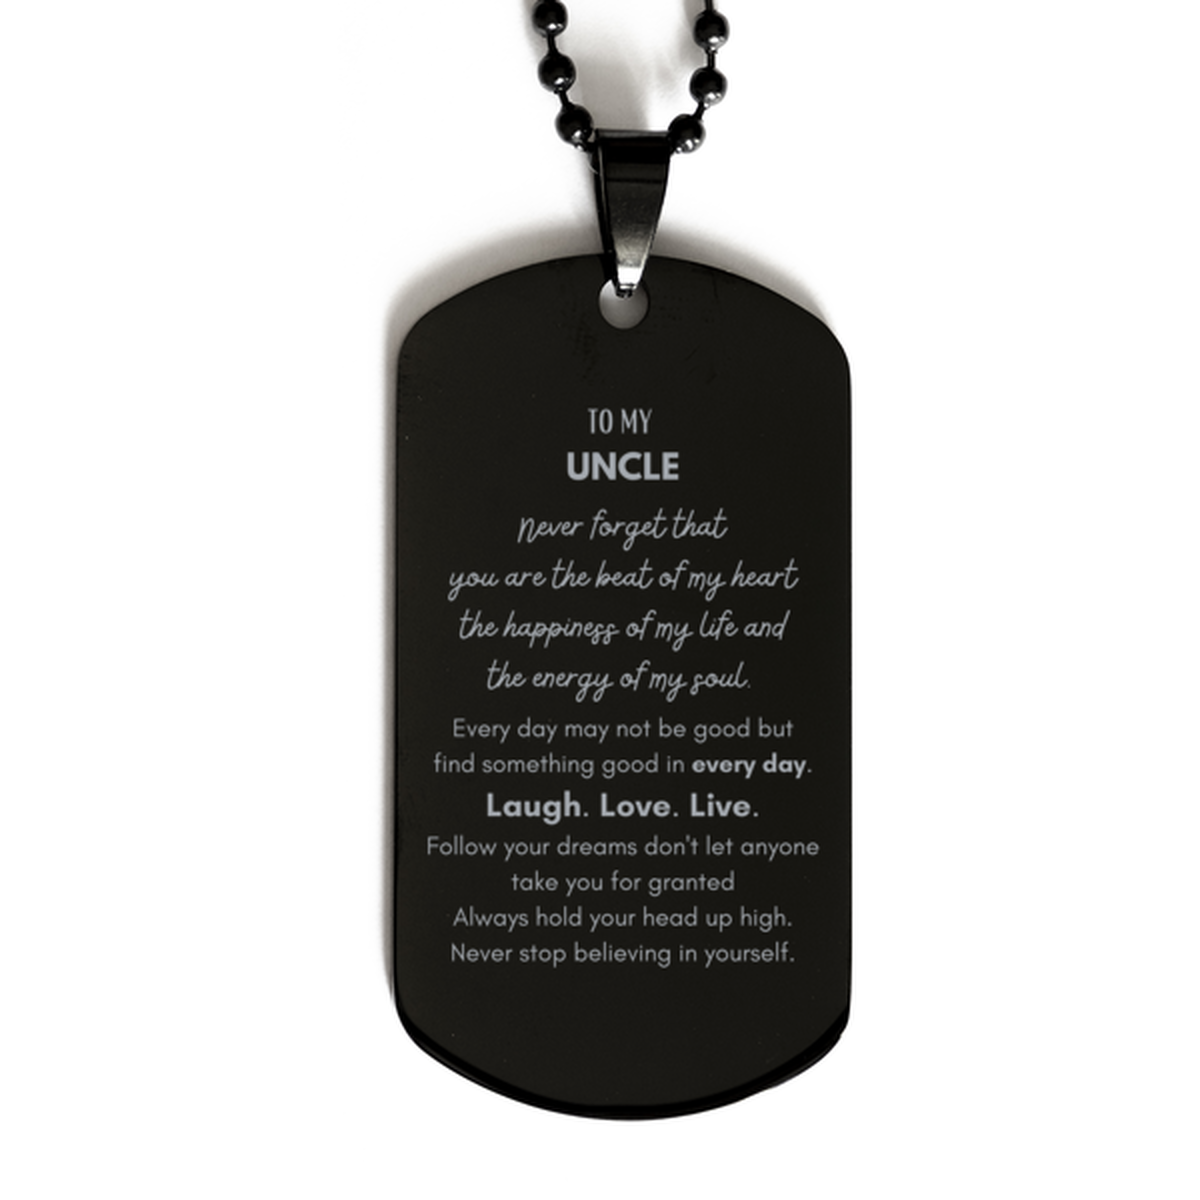 To My Uncle Dogtag Gifts, Christmas Uncle Black Dog Tag Present, Birthday Unique Motivational For Uncle, To My Uncle Never forget that you are the beat of my heart the happiness of my life and the energy of my soul